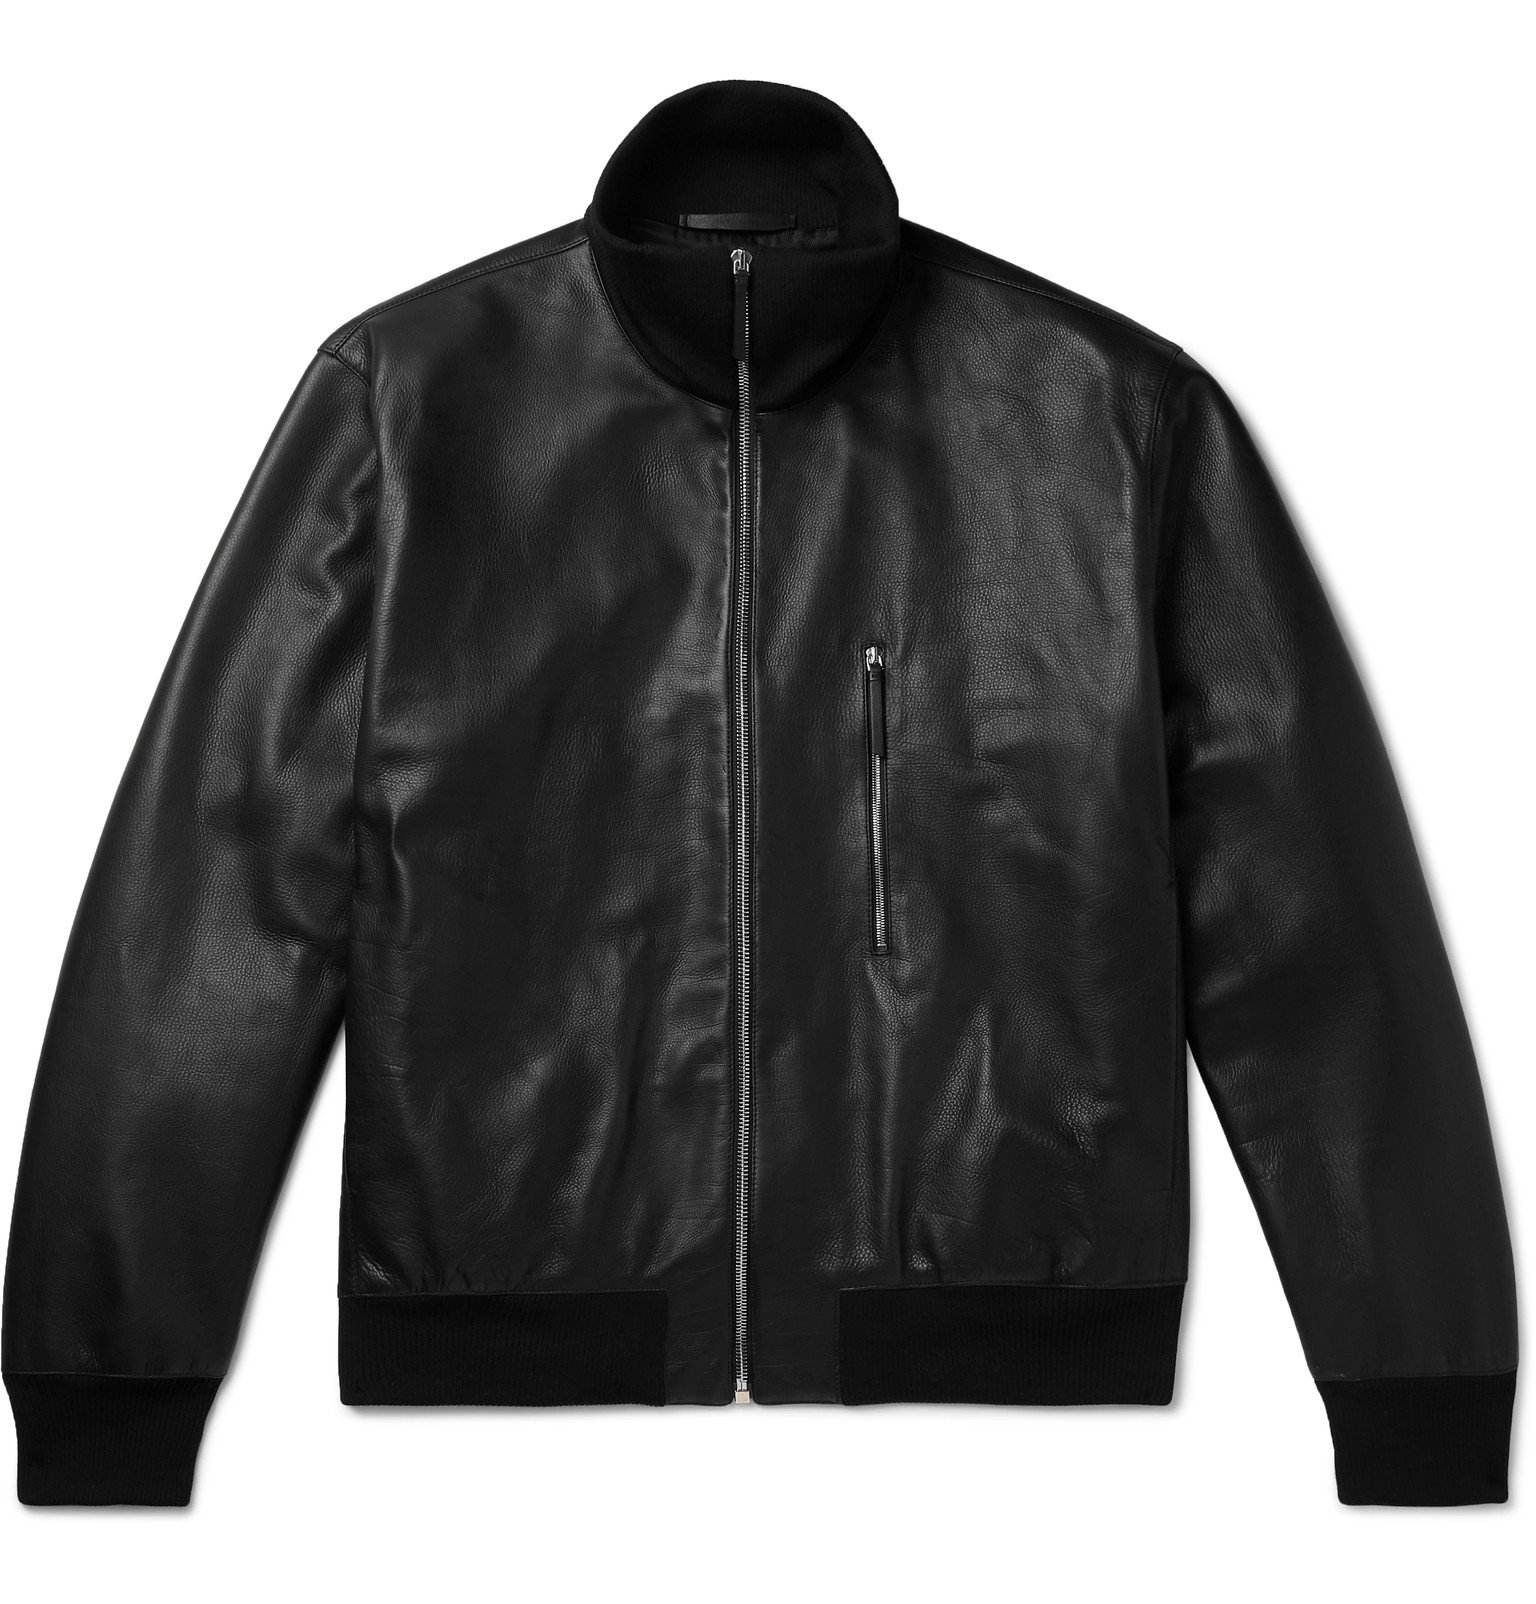 The Row - Liam Leather Bomber Jacket - Black The Row